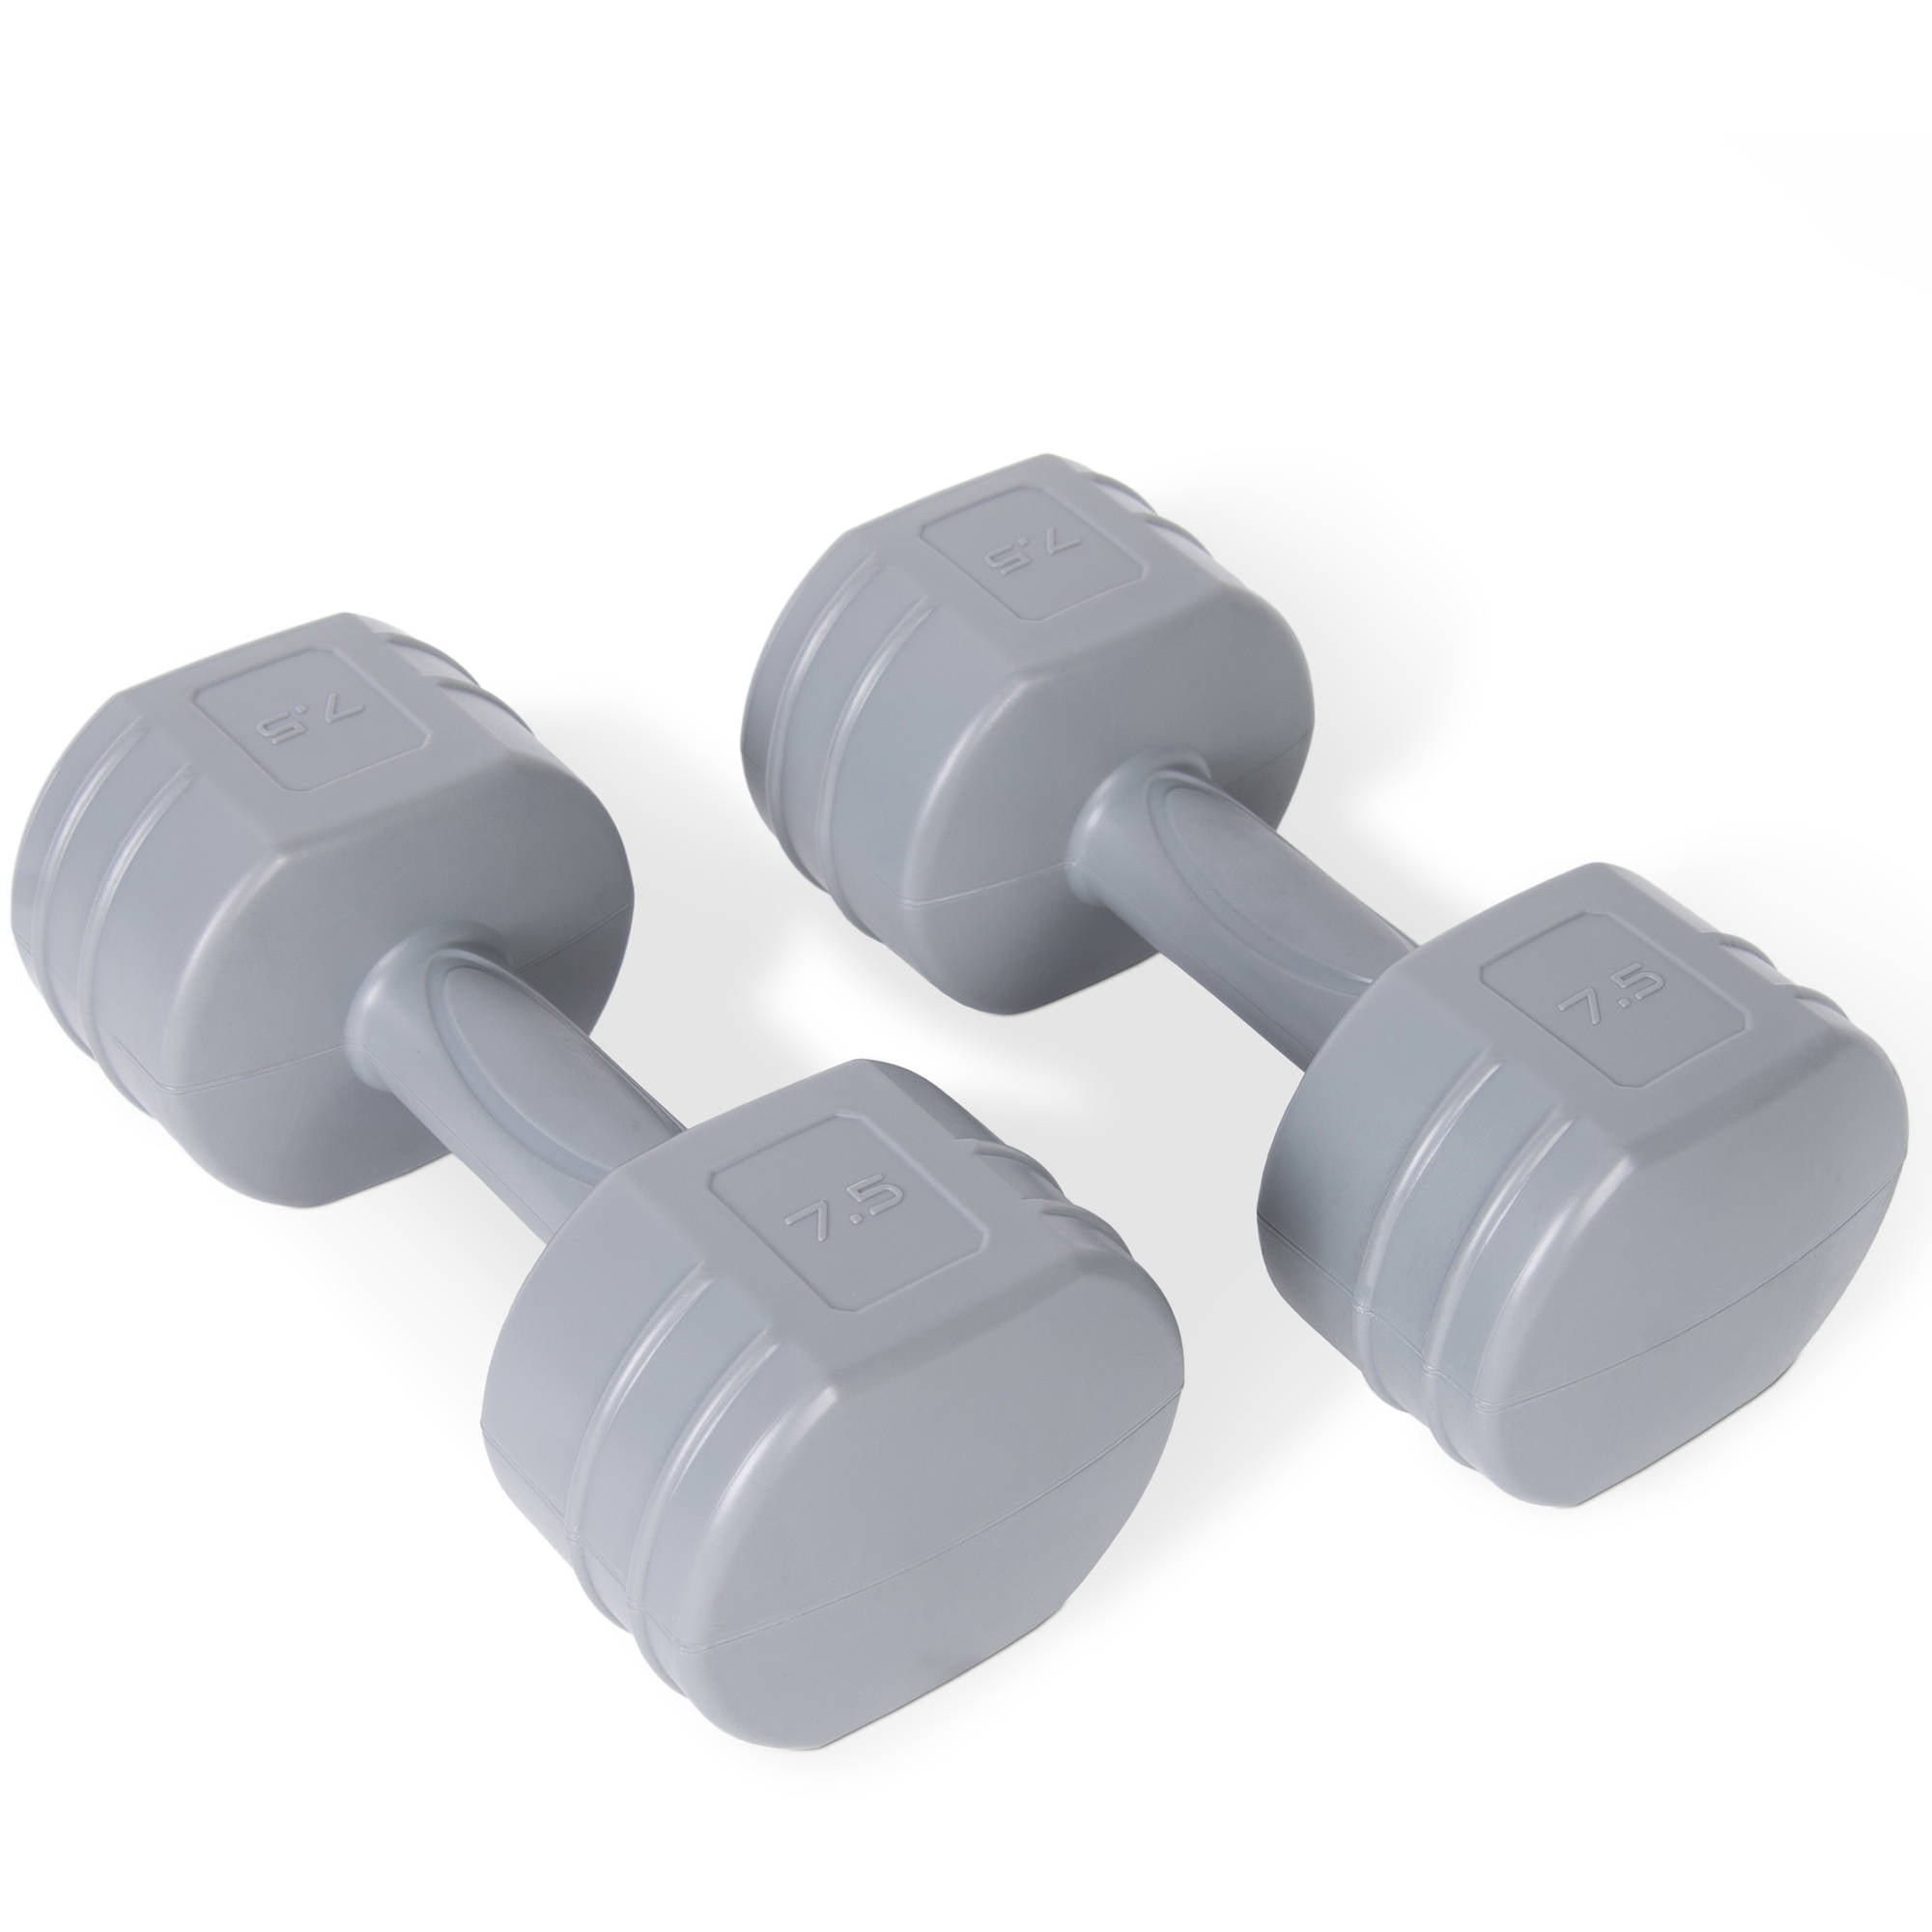 Steel Reinforced Concrete Dumbbell Weights Fixed weight dumbbells 